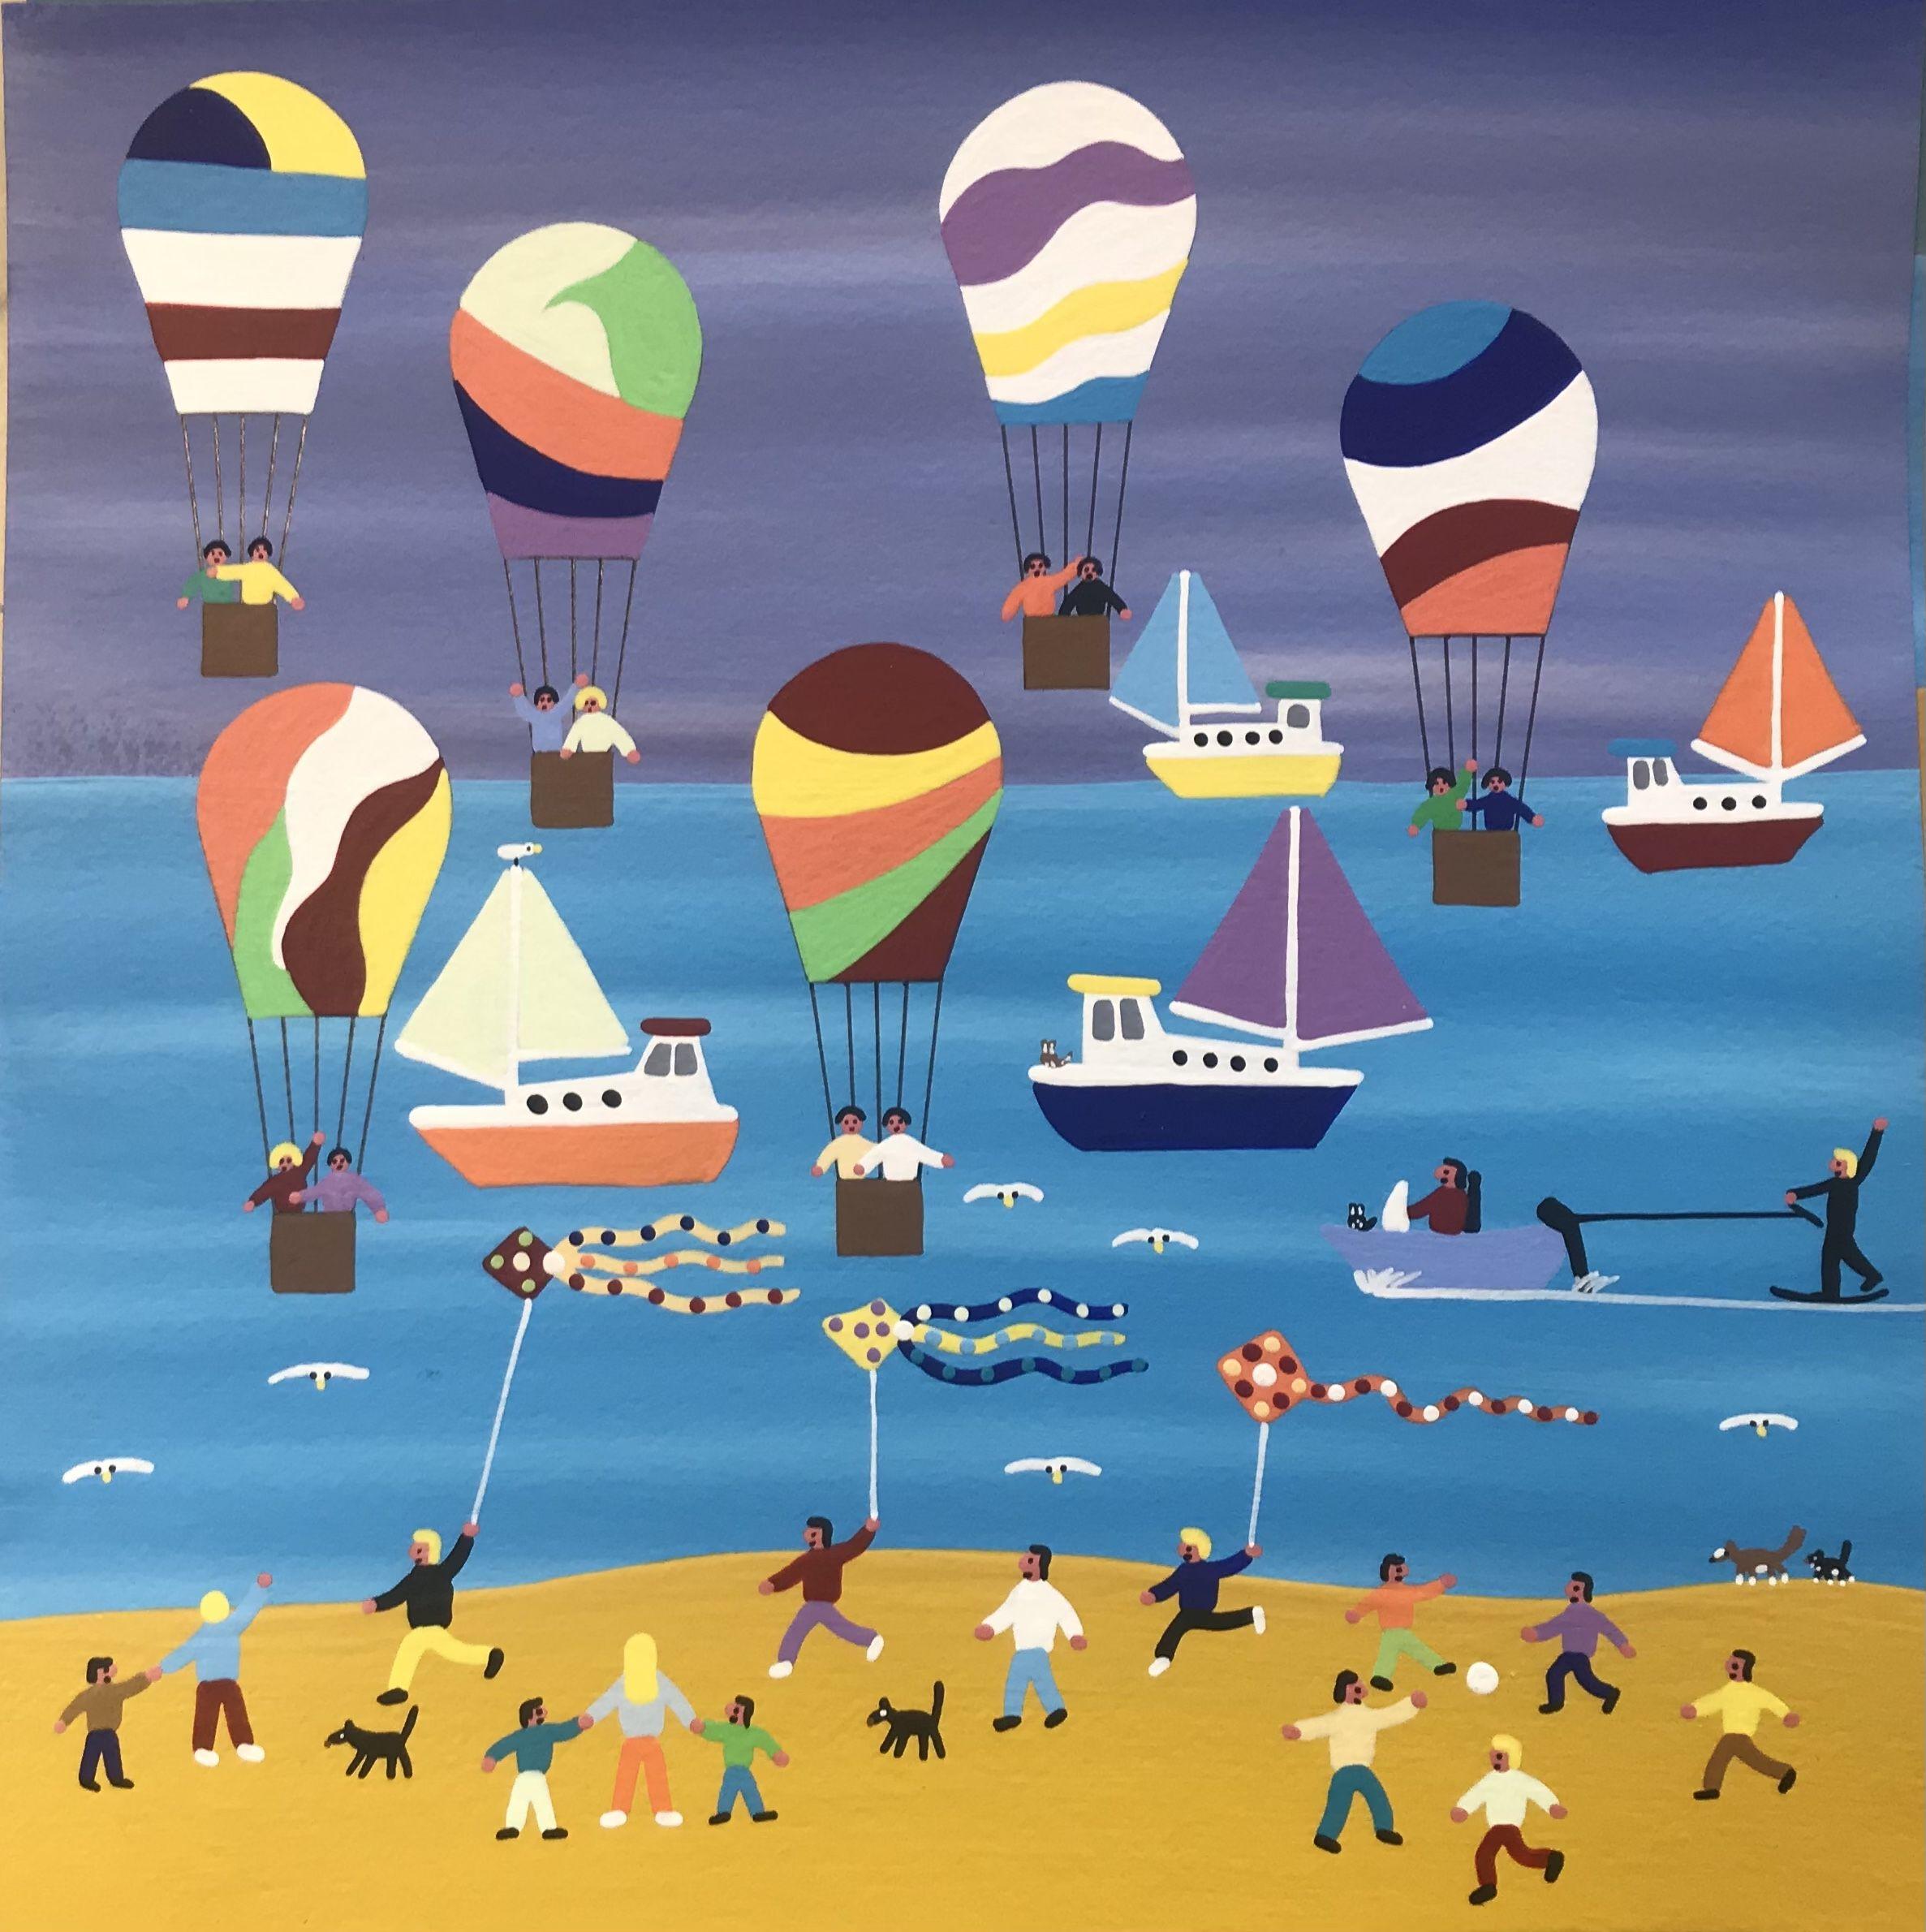 Flying the kites on the beach with the hot air balloonâ€™s rising in the sky :: Painting :: Folk Art :: This piece comes with an official certificate of authenticity signed by the artist :: Ready to Hang: No :: Signed: Yes :: Signature Location: